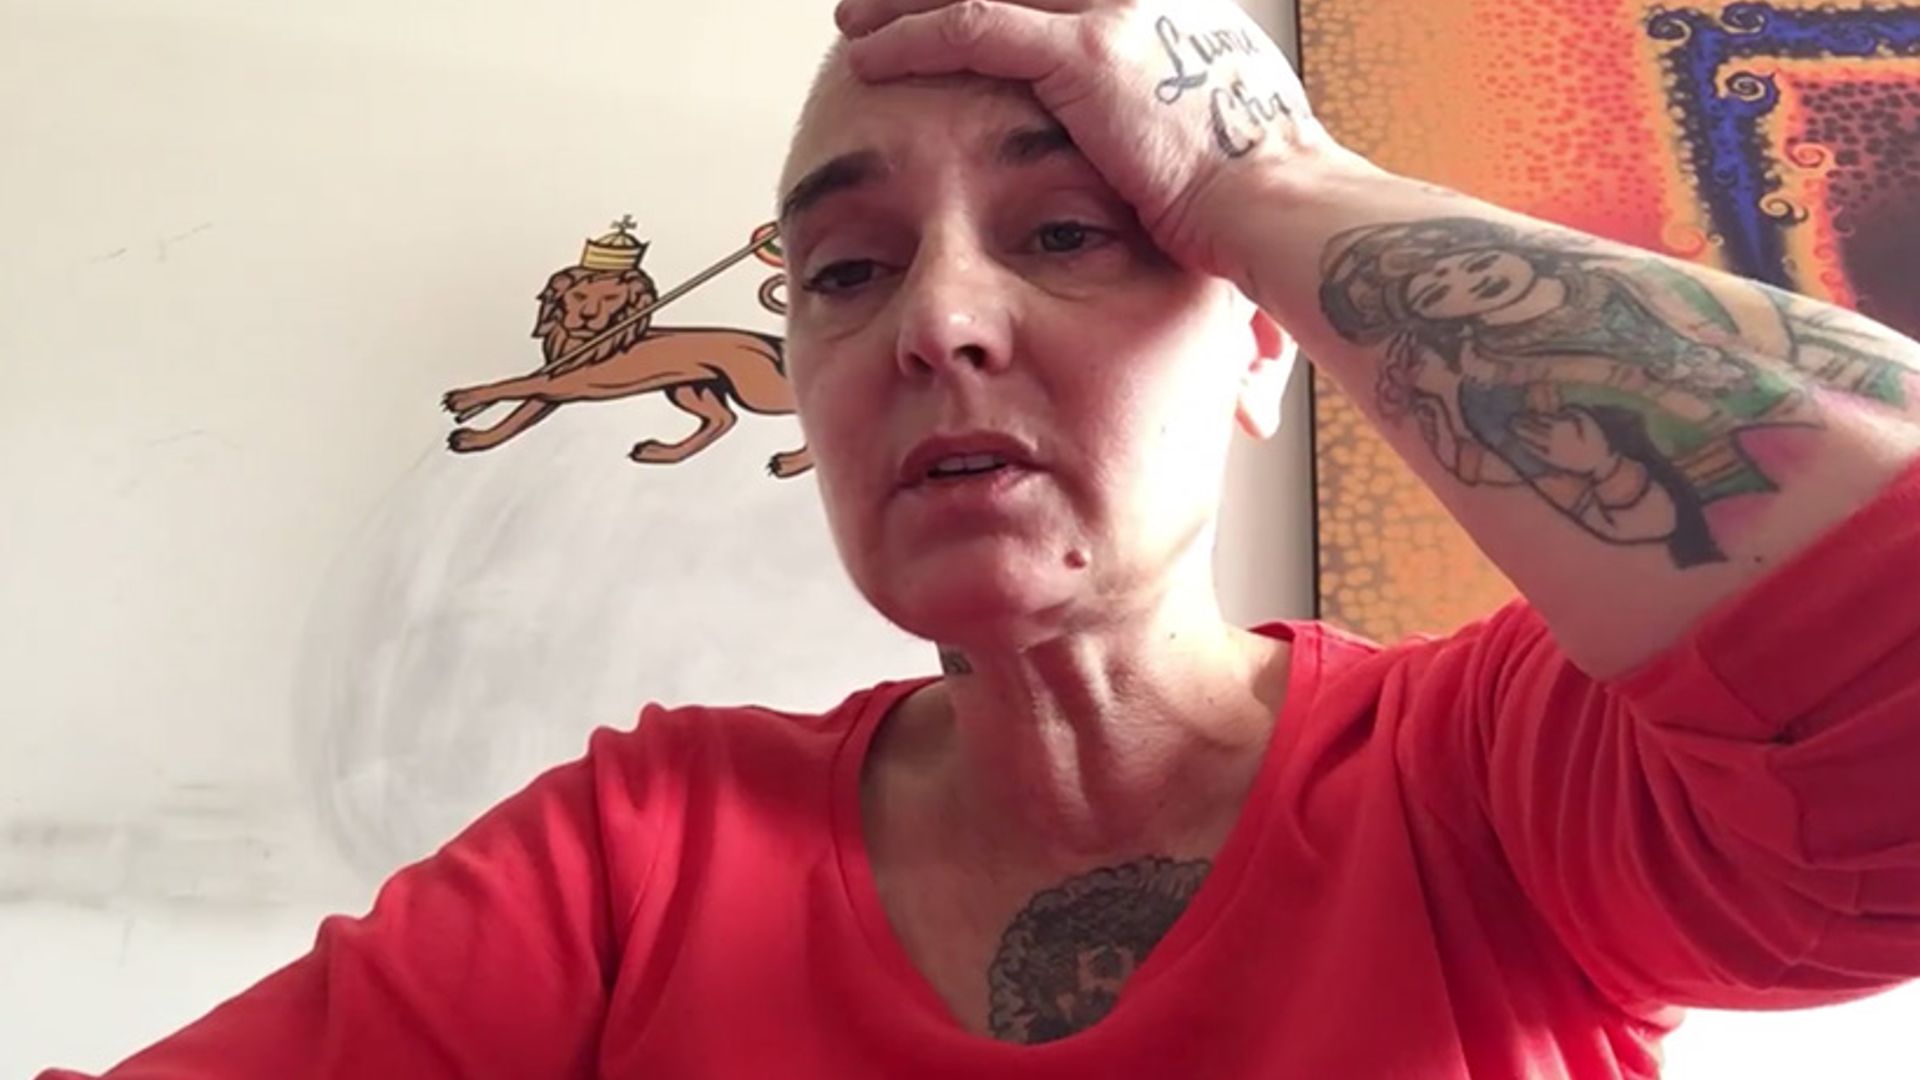 Sinead O'Connor has been admitted to hospital: 'I'm totally destroyed now'